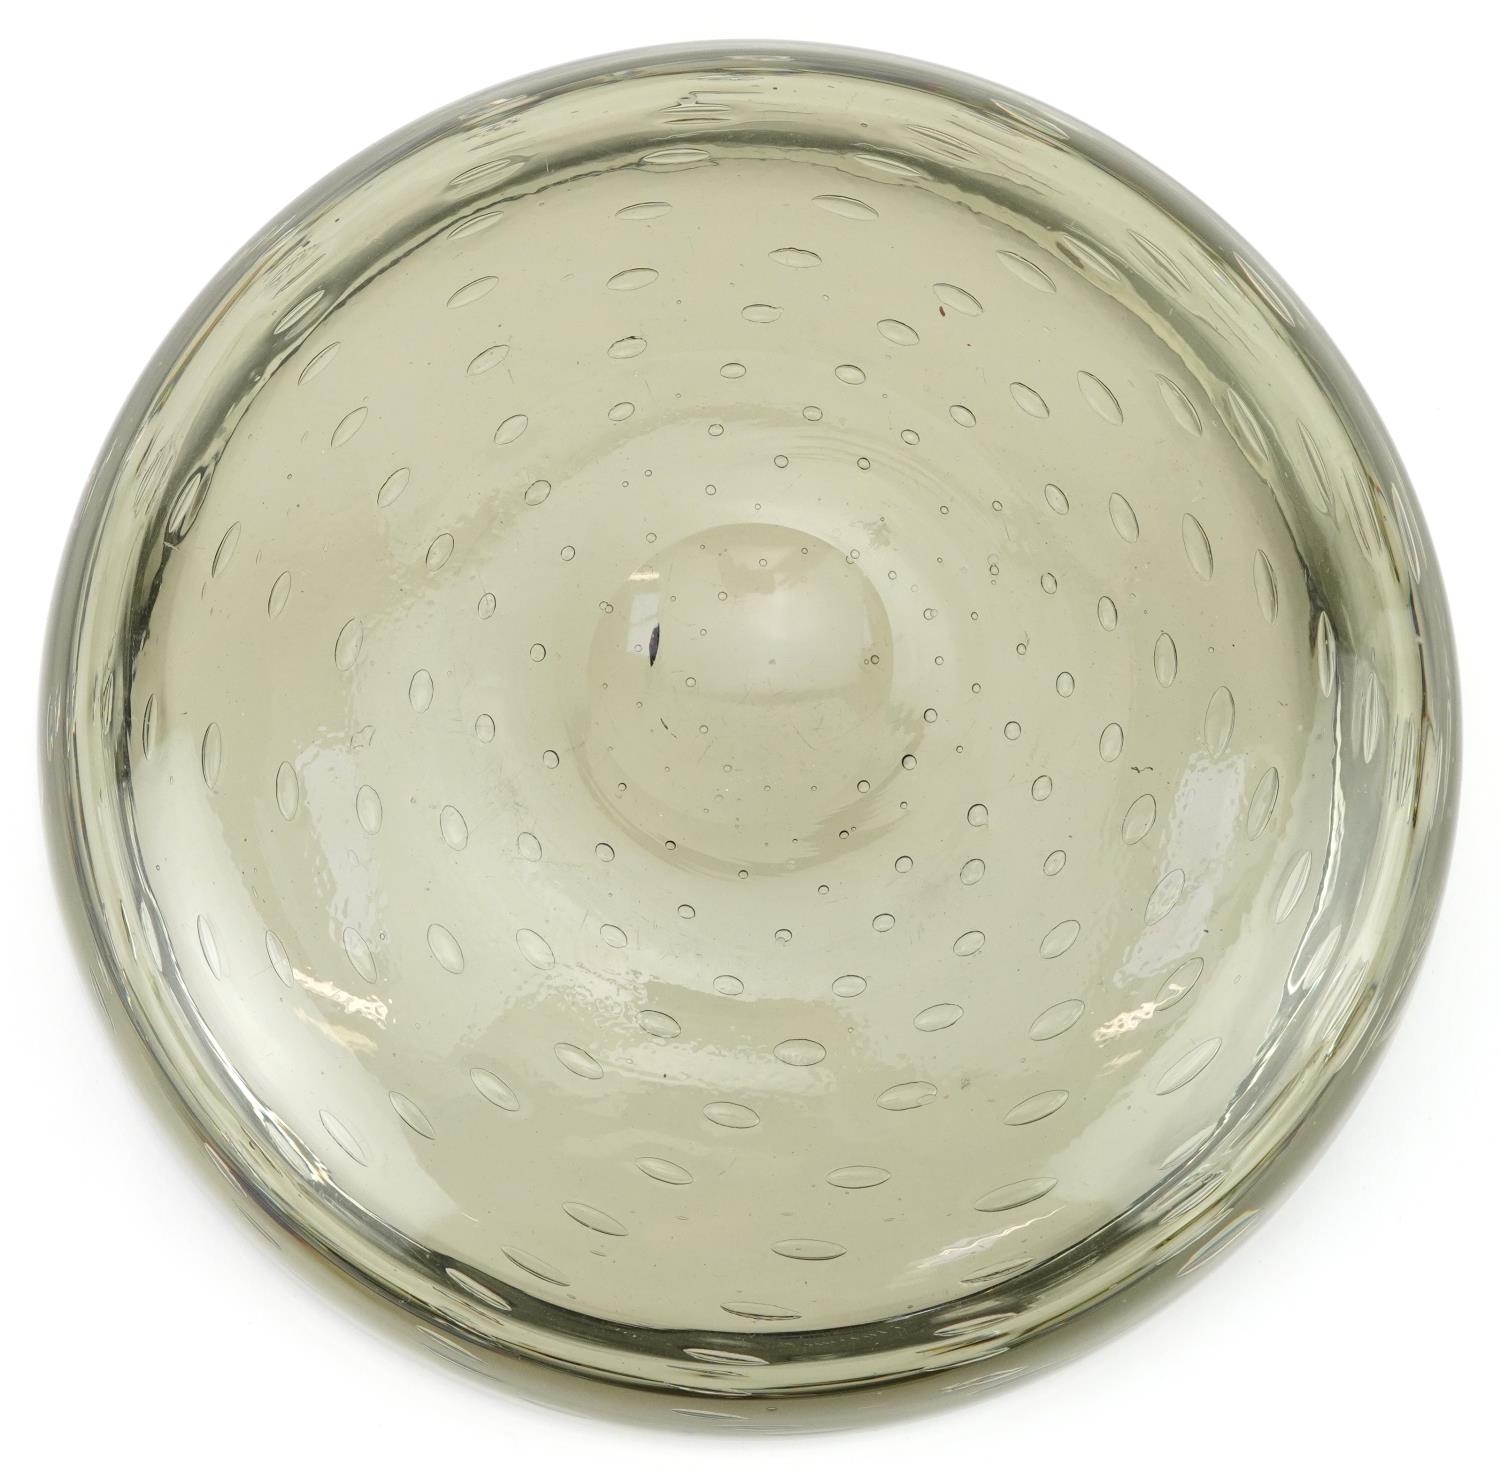 Geoffrey Baxter for Whitefriars, mid century centre bowl with controlled bubbles, 25cm in diameter - Image 4 of 4